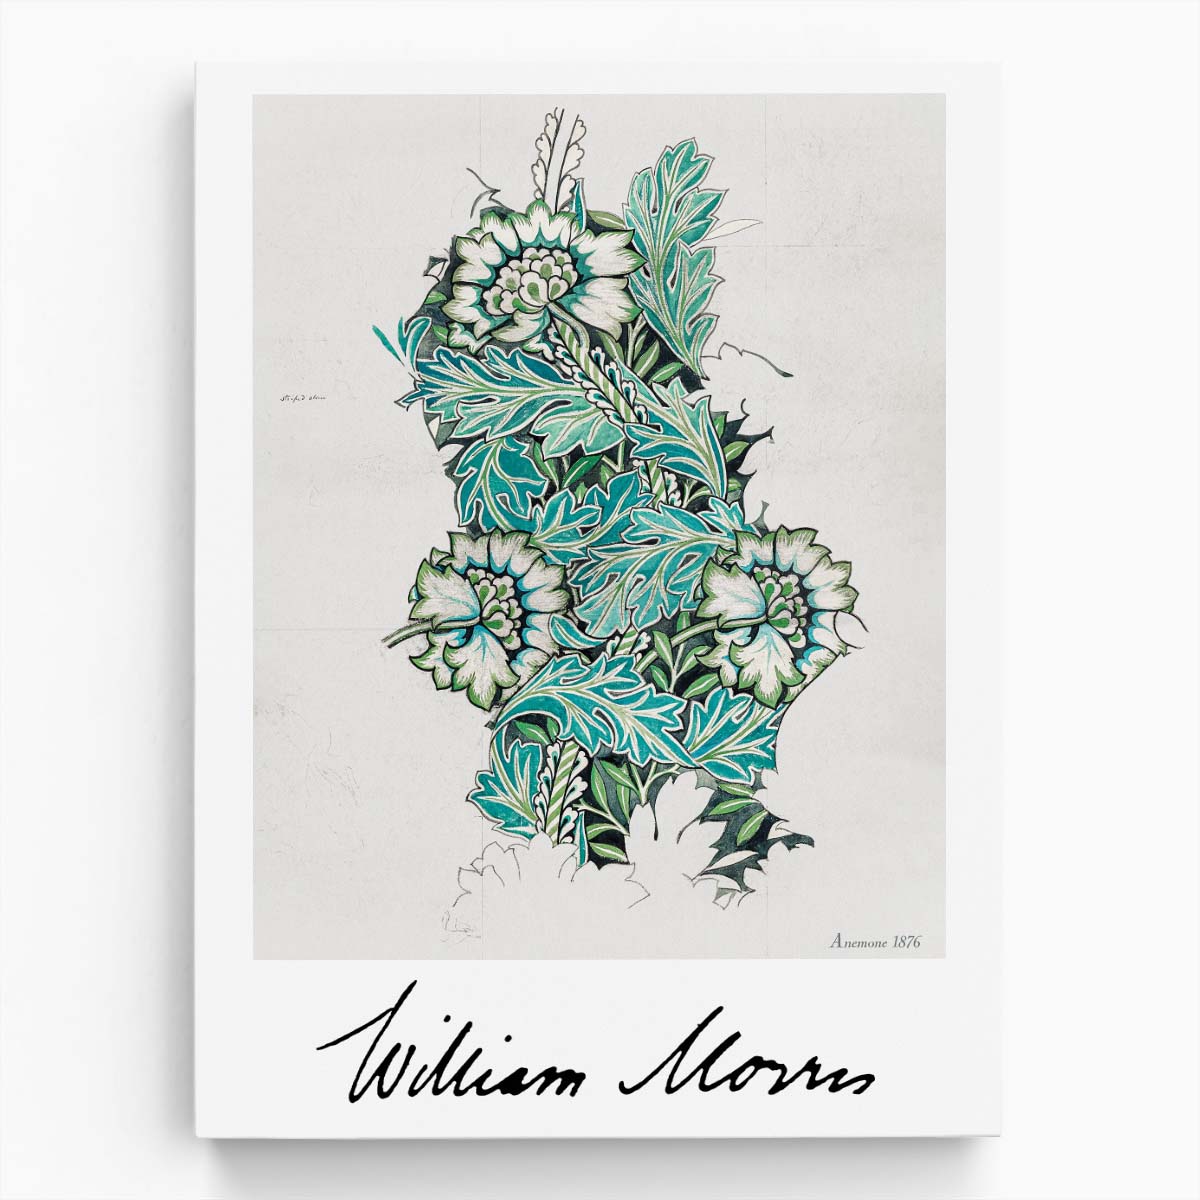 William Morris Vintage Anemone Illustration, Inspirational Green Typography Poster by Luxuriance Designs, made in USA